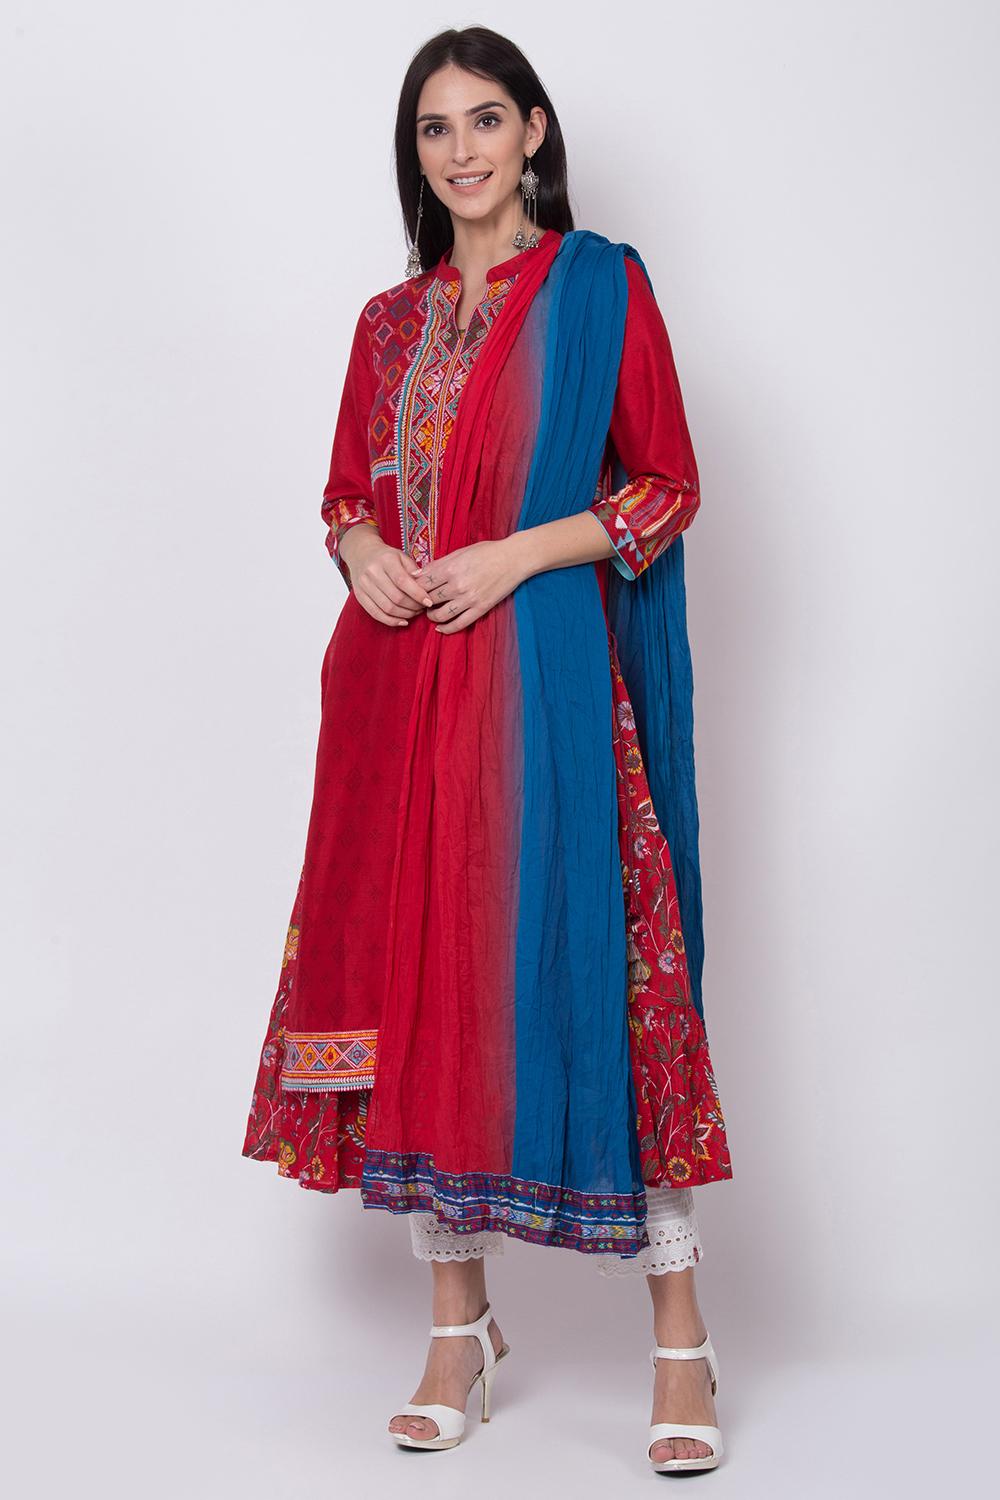 Buy Online Blue And Red Cotton Dupatta for Women & Girls at Best ...